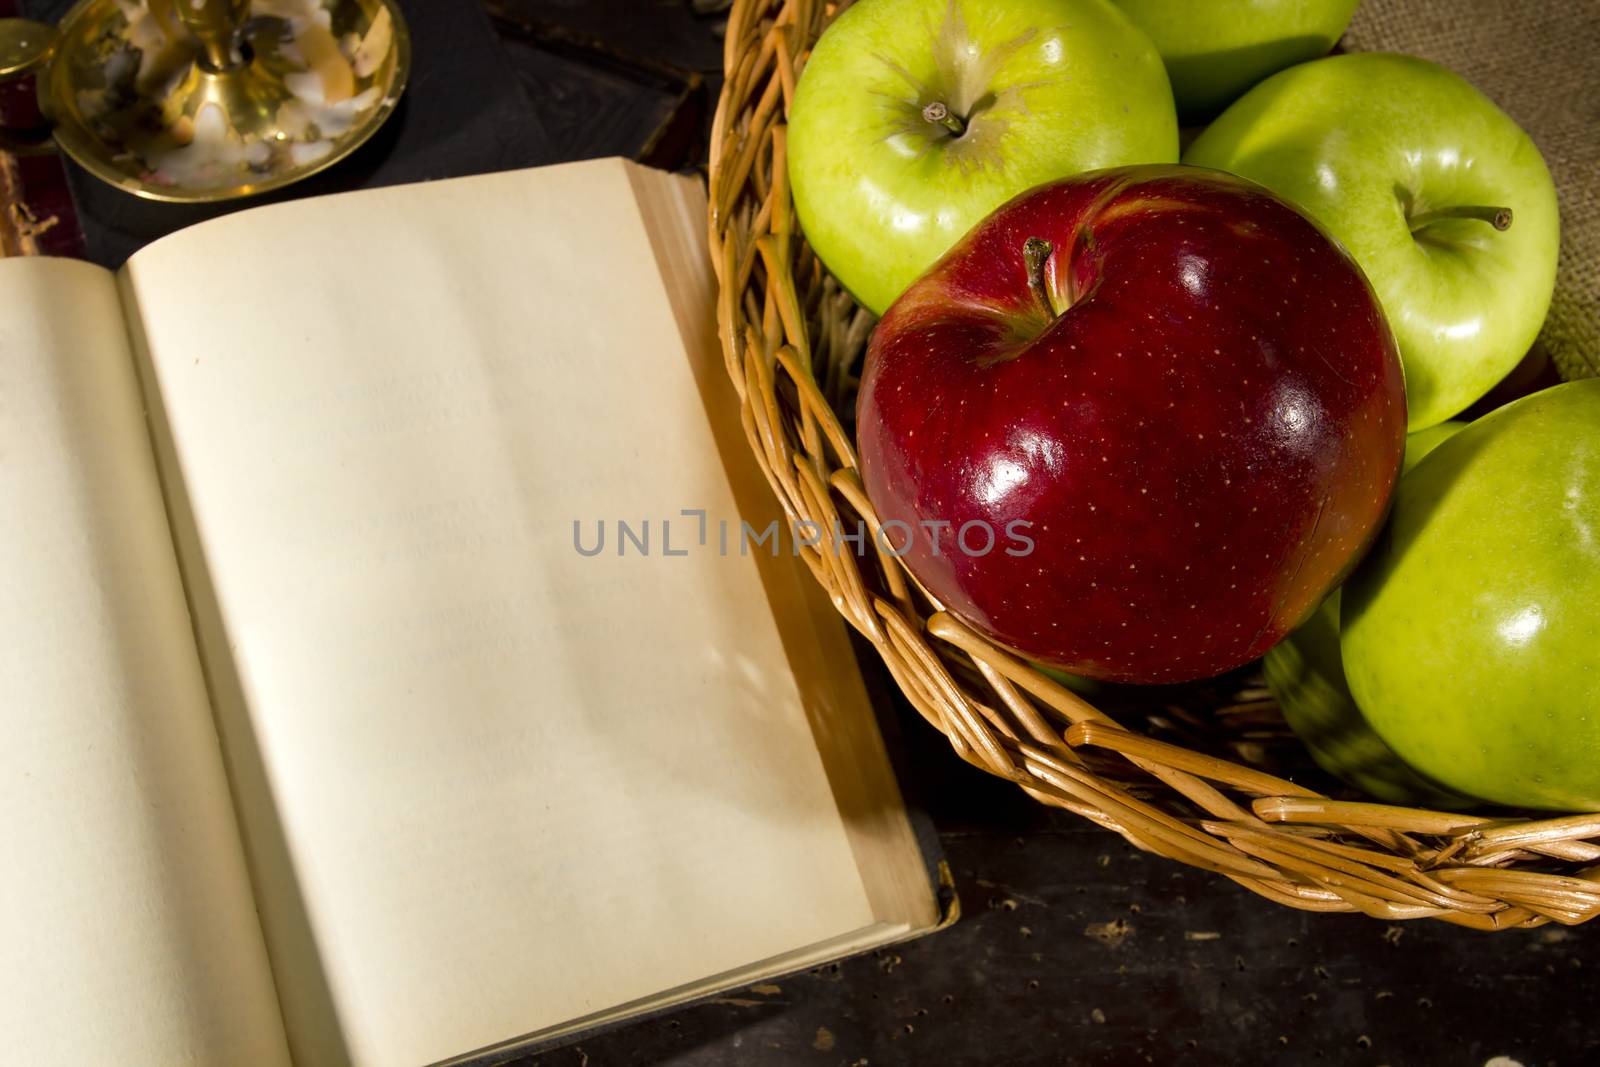 Vintage still life with apples and a book on an old wooden table